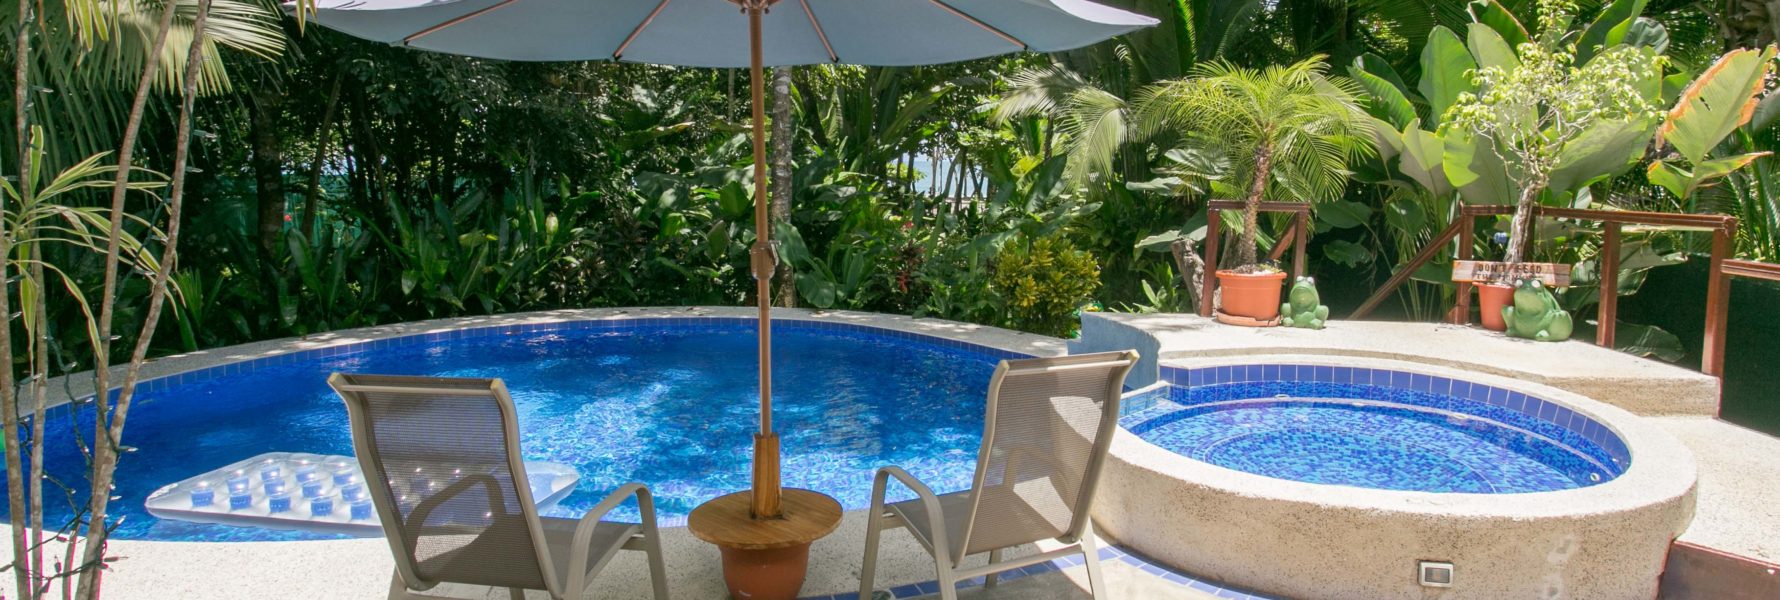 The private pool is surrounded by tropical plants with the beach just on the other side.